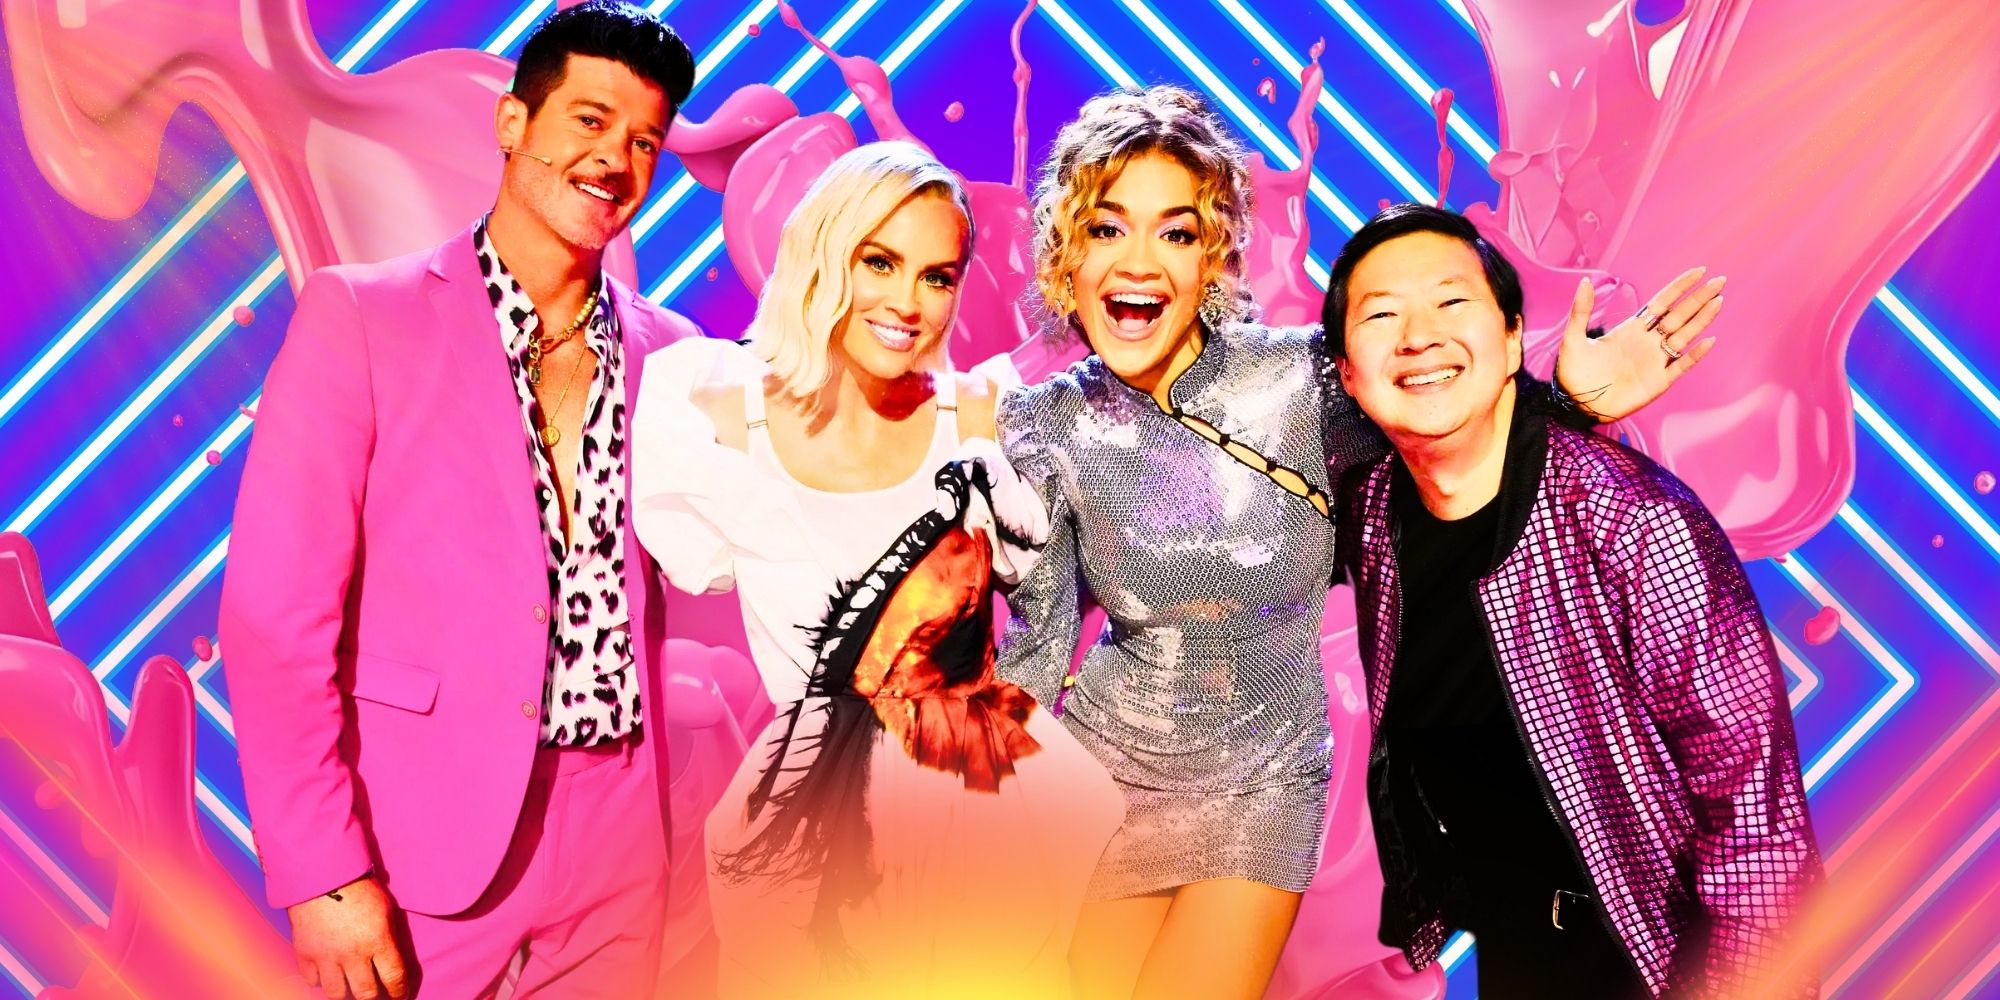 The Masked Singer Season 11 cast of panelists Robin Thicke, Jenny McCarthy, Rita Ora and Ken Jeong smile, with pink paint splashing behind them